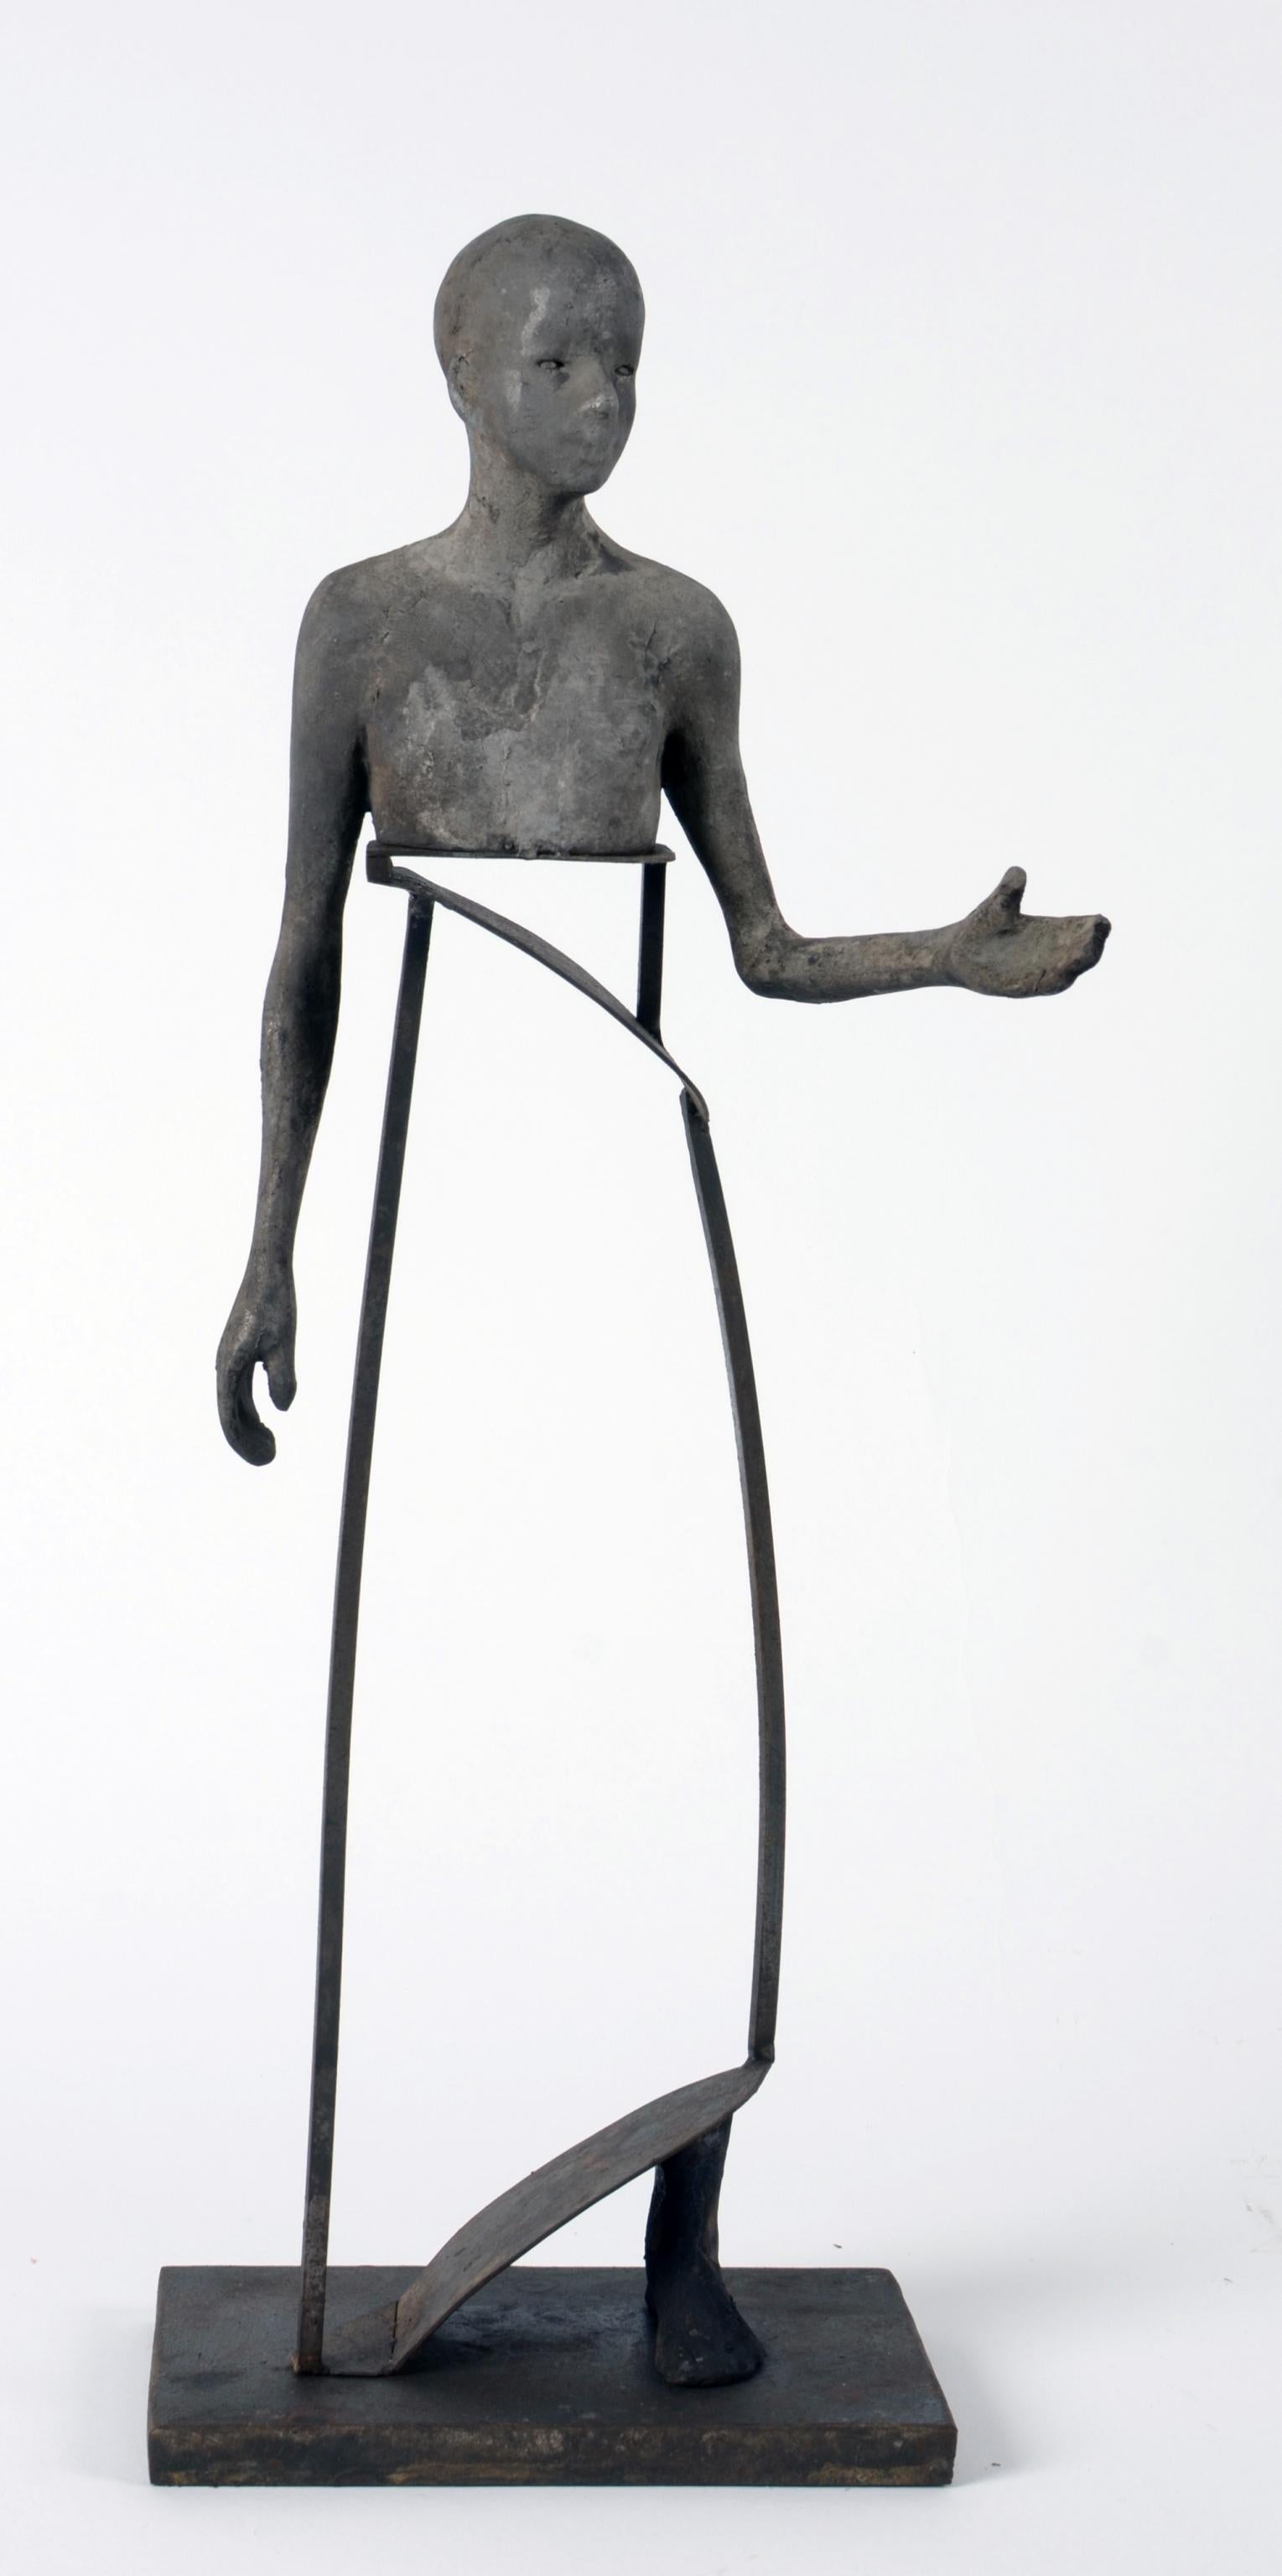 Jesus Curia Perez Figurative Sculpture - Aire IV, Bronze Head, Torso and Foot with Abstract Open Body Steel Sculpture